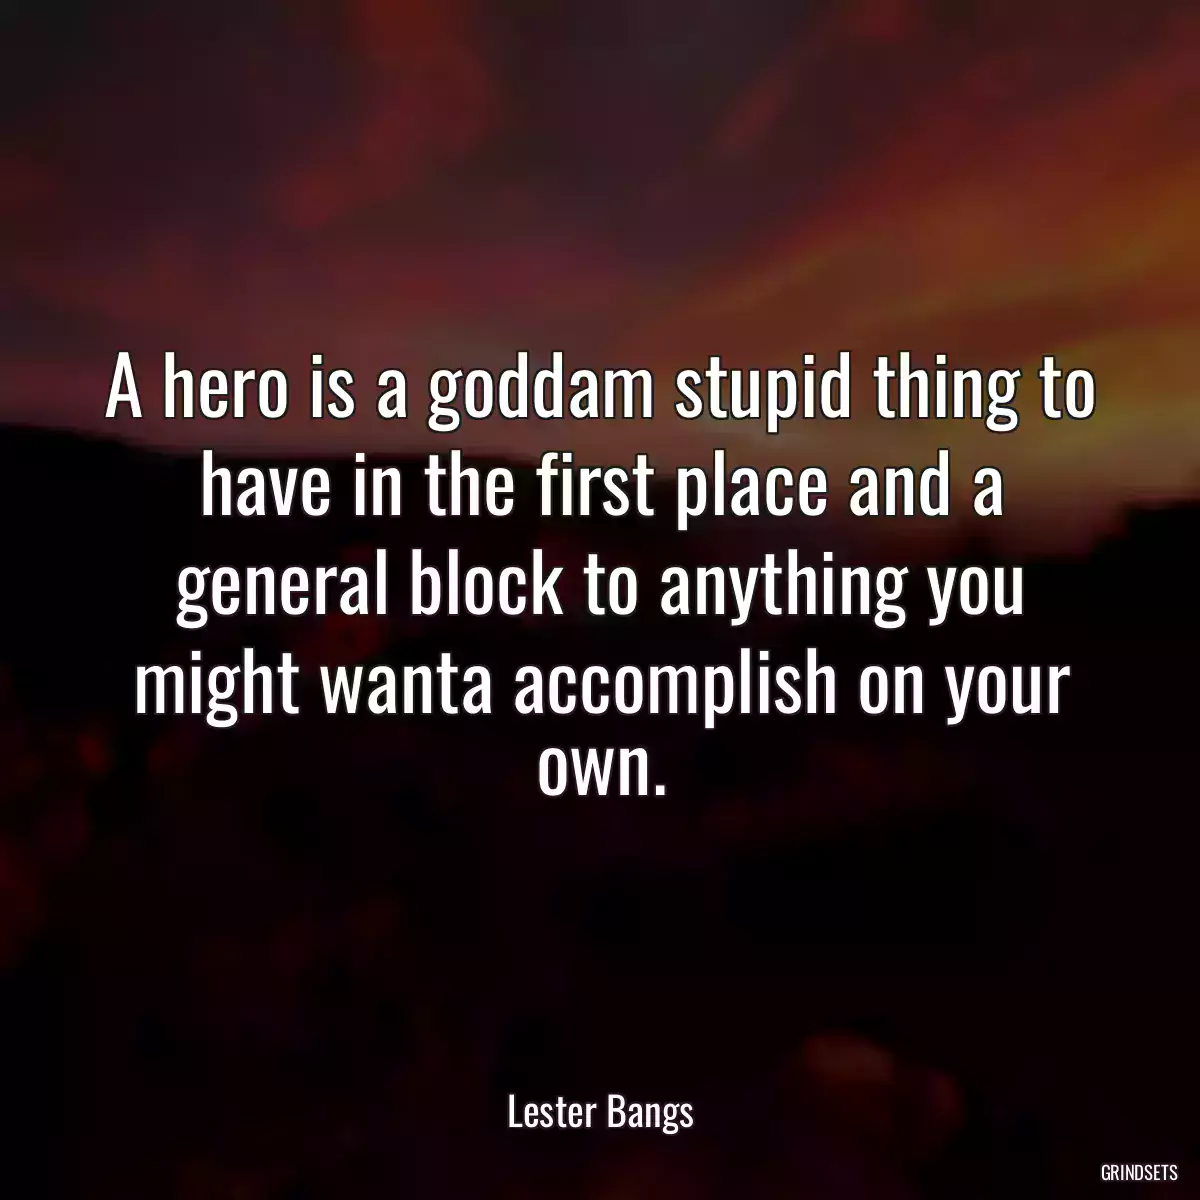 A hero is a goddam stupid thing to have in the first place and a general block to anything you might wanta accomplish on your own.